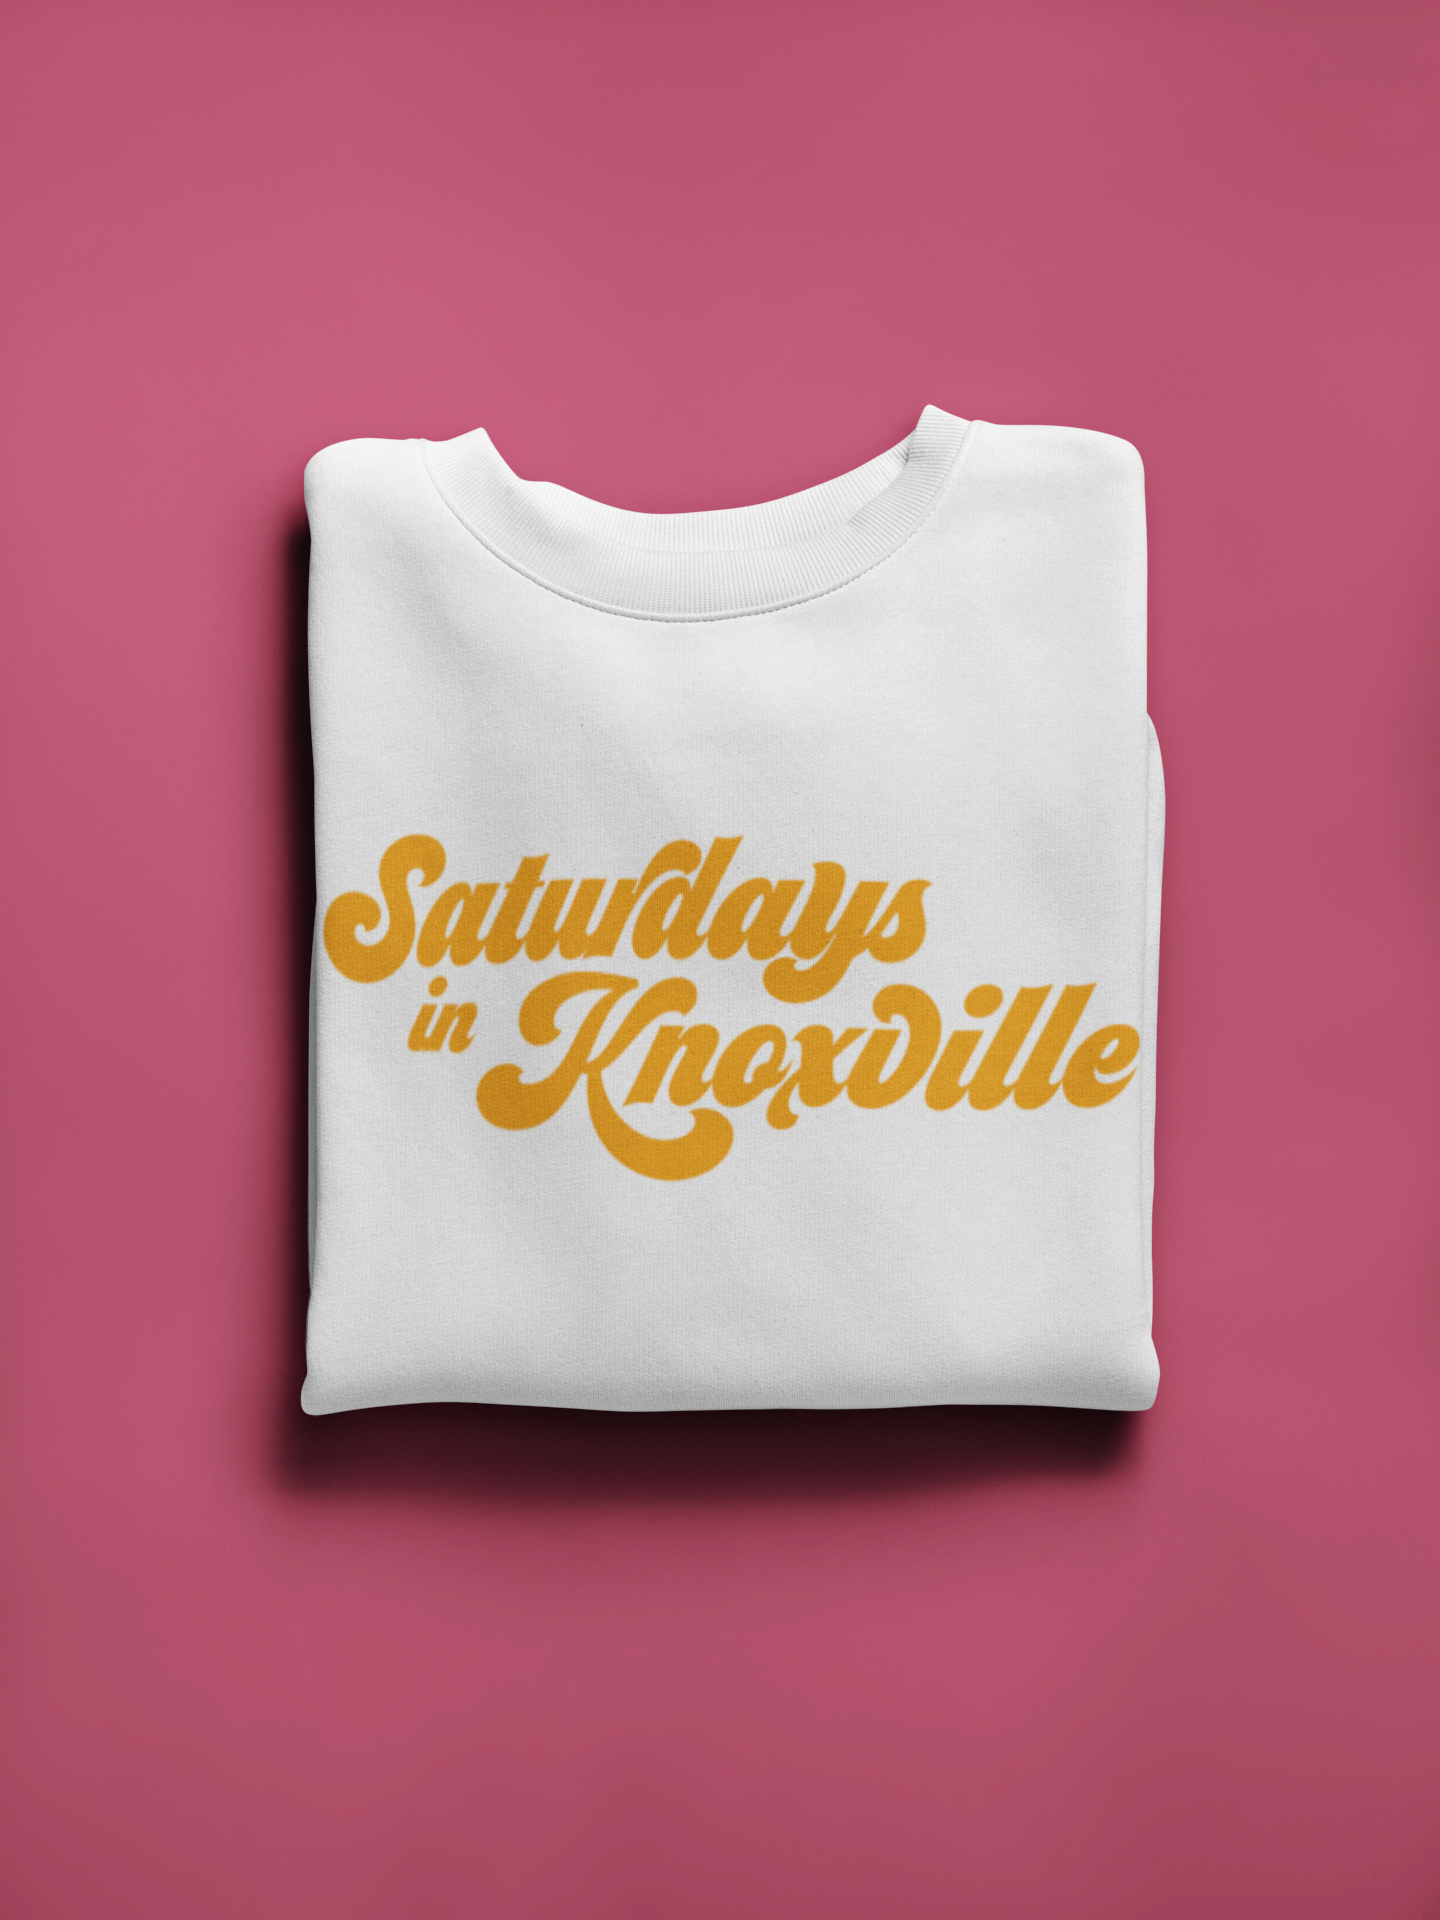 Saturdays in Knoxville Tennessee SVG Digital Download Design File